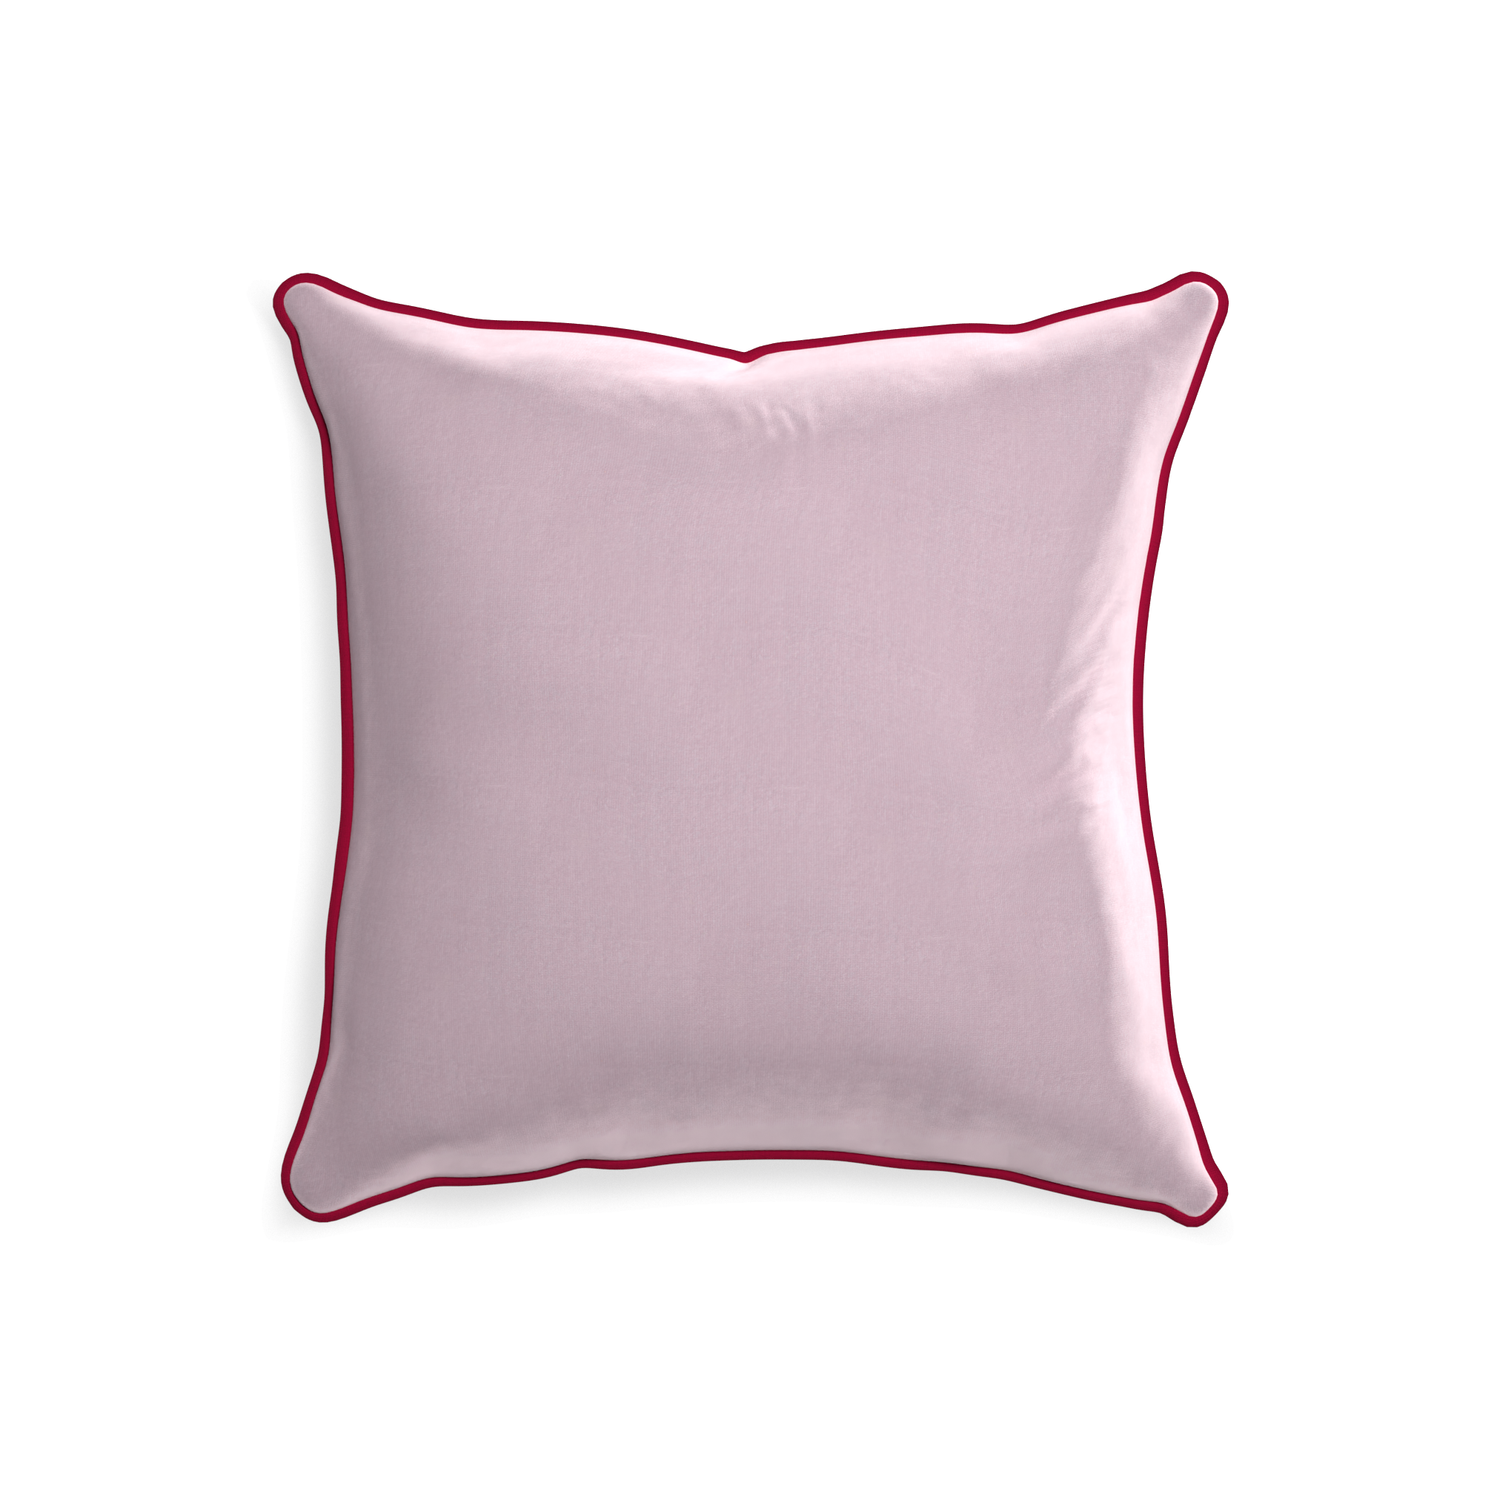 20-square lilac velvet custom pillow with raspberry piping on white background